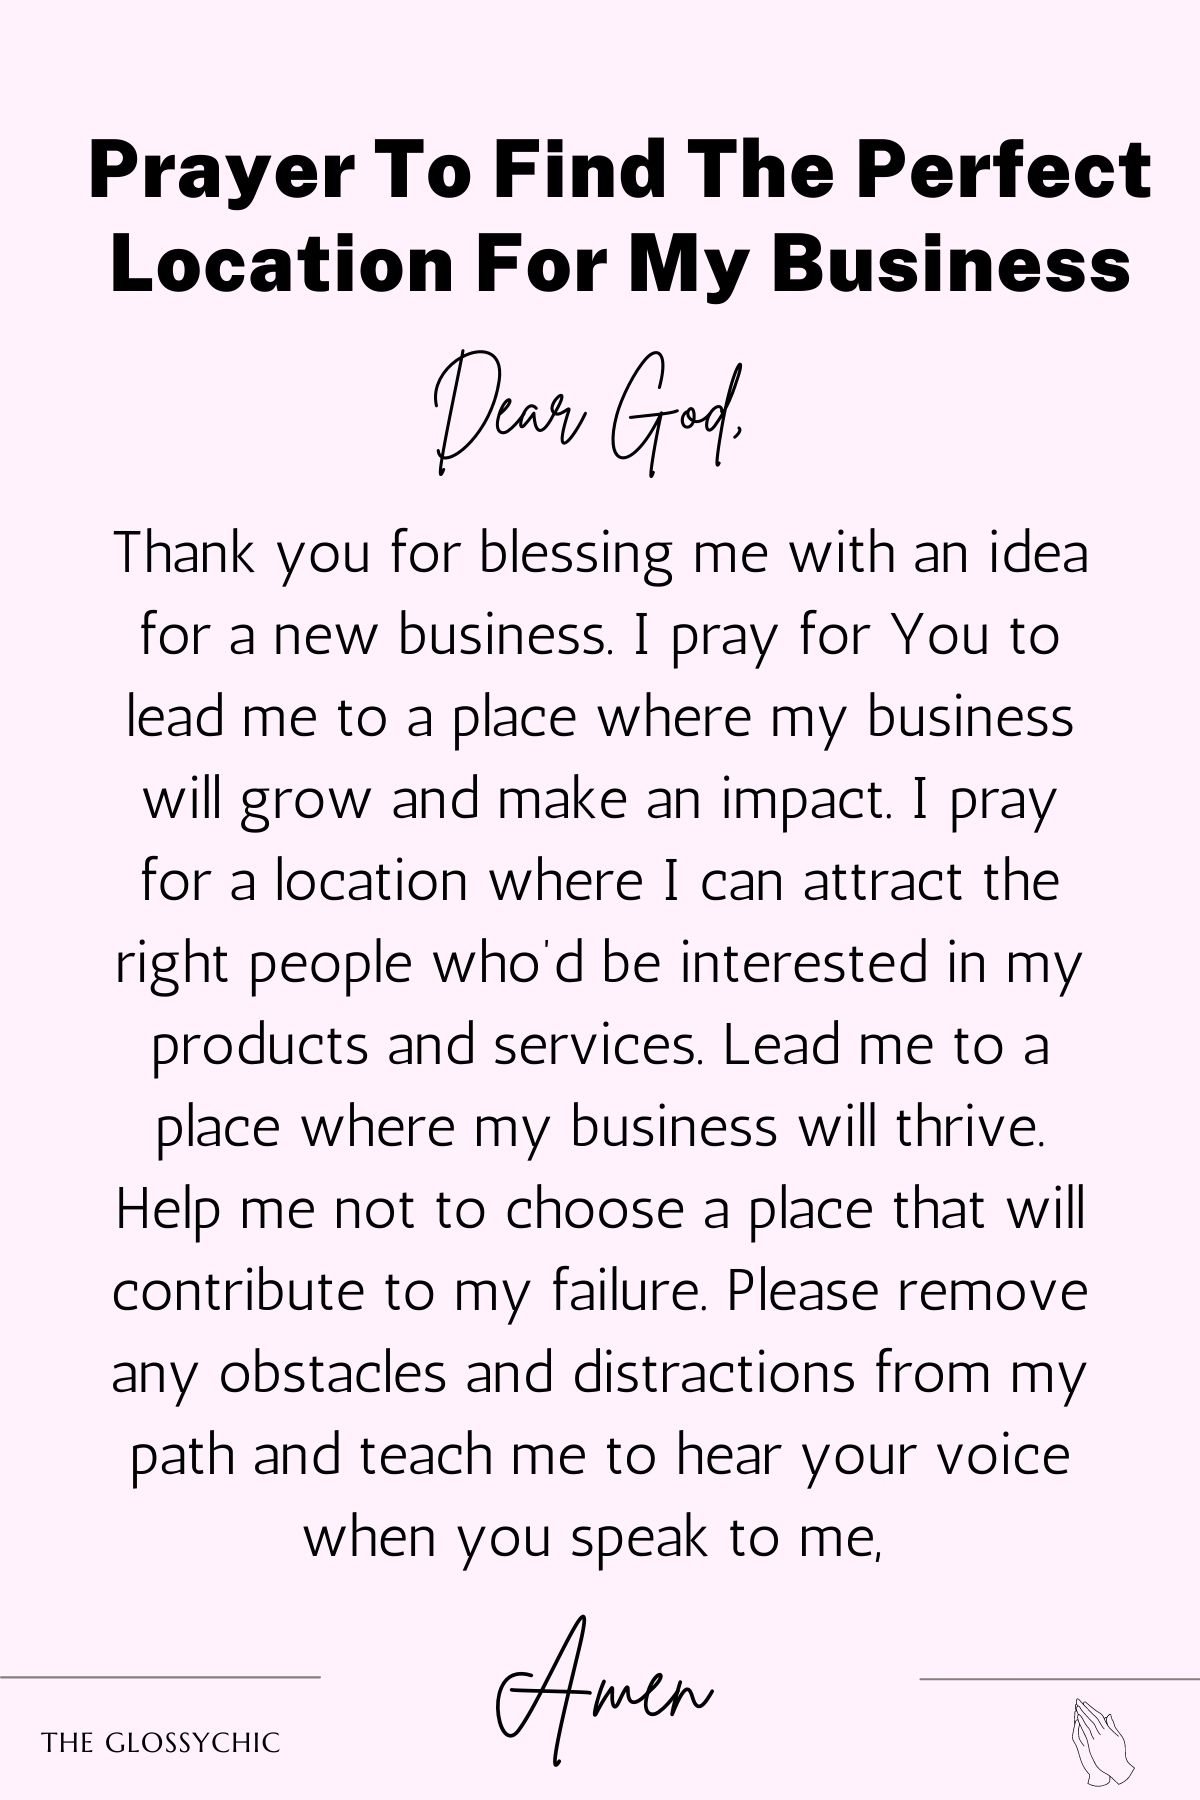 Prayer to find the perfect location for my business